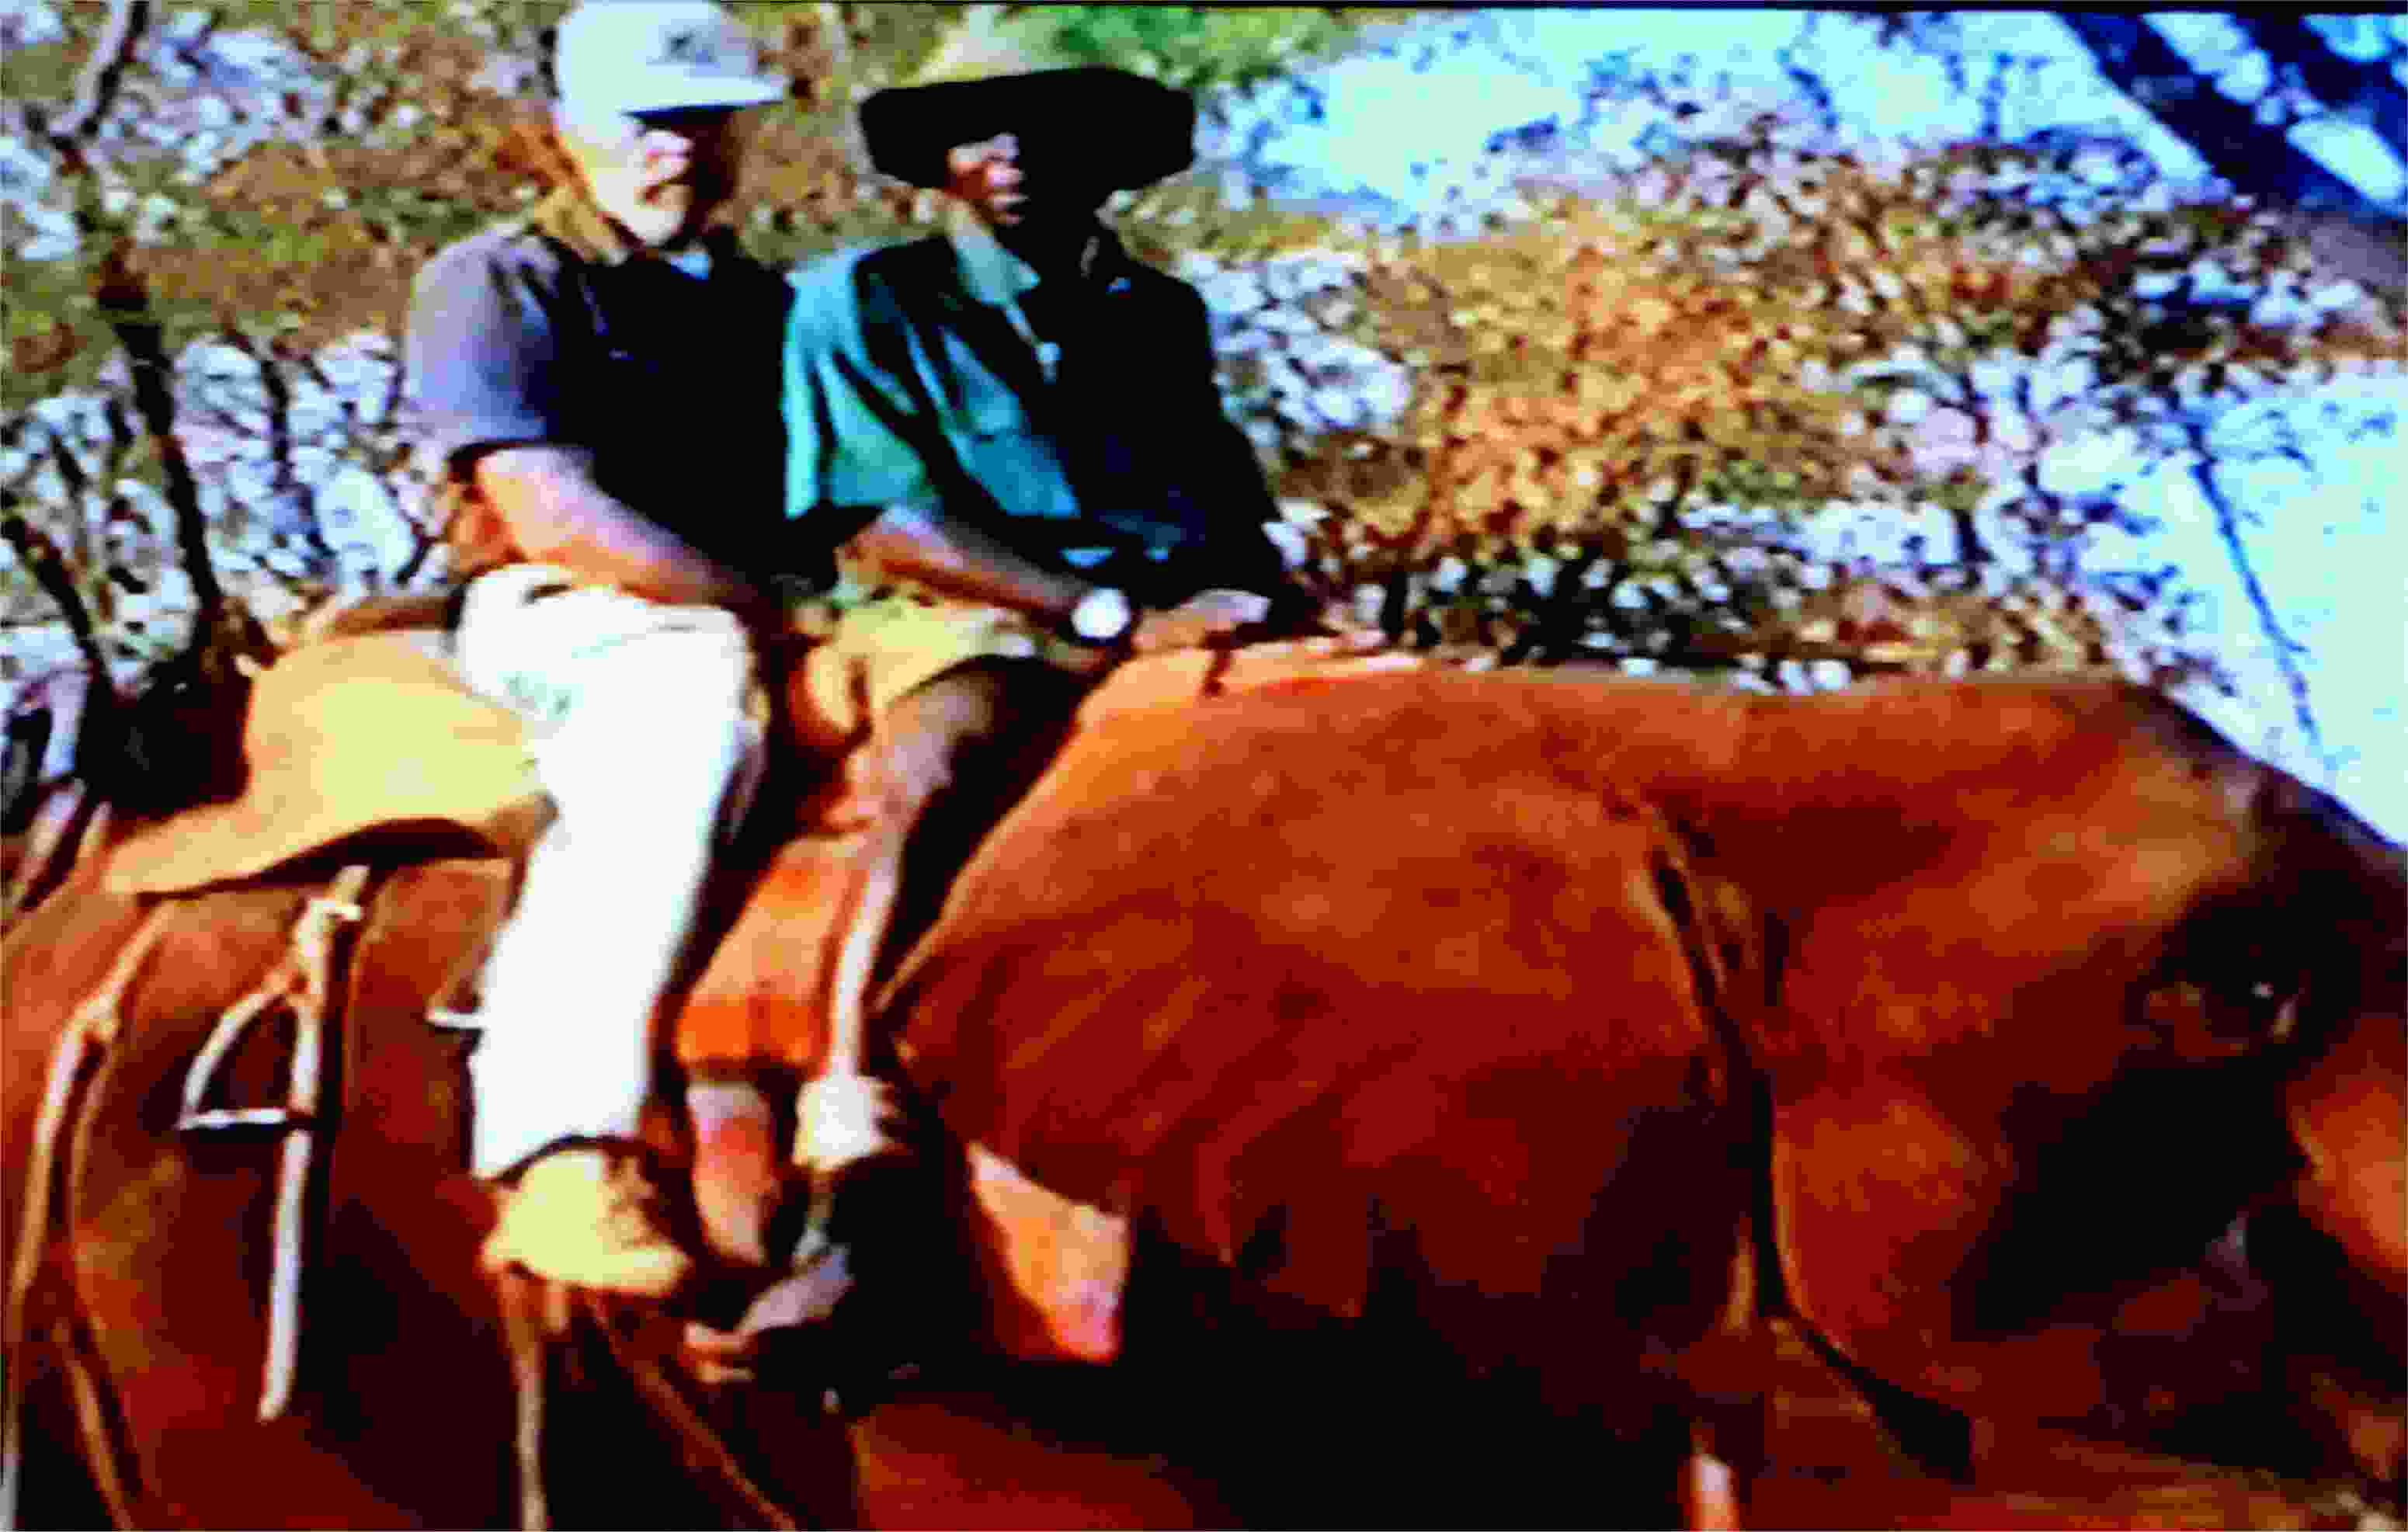 Jim's elephant rides were not as successful as mine.  He suffered a sore and uncomfortable bottom from bumping around in the elephant saddle.  Photo from video by FG.